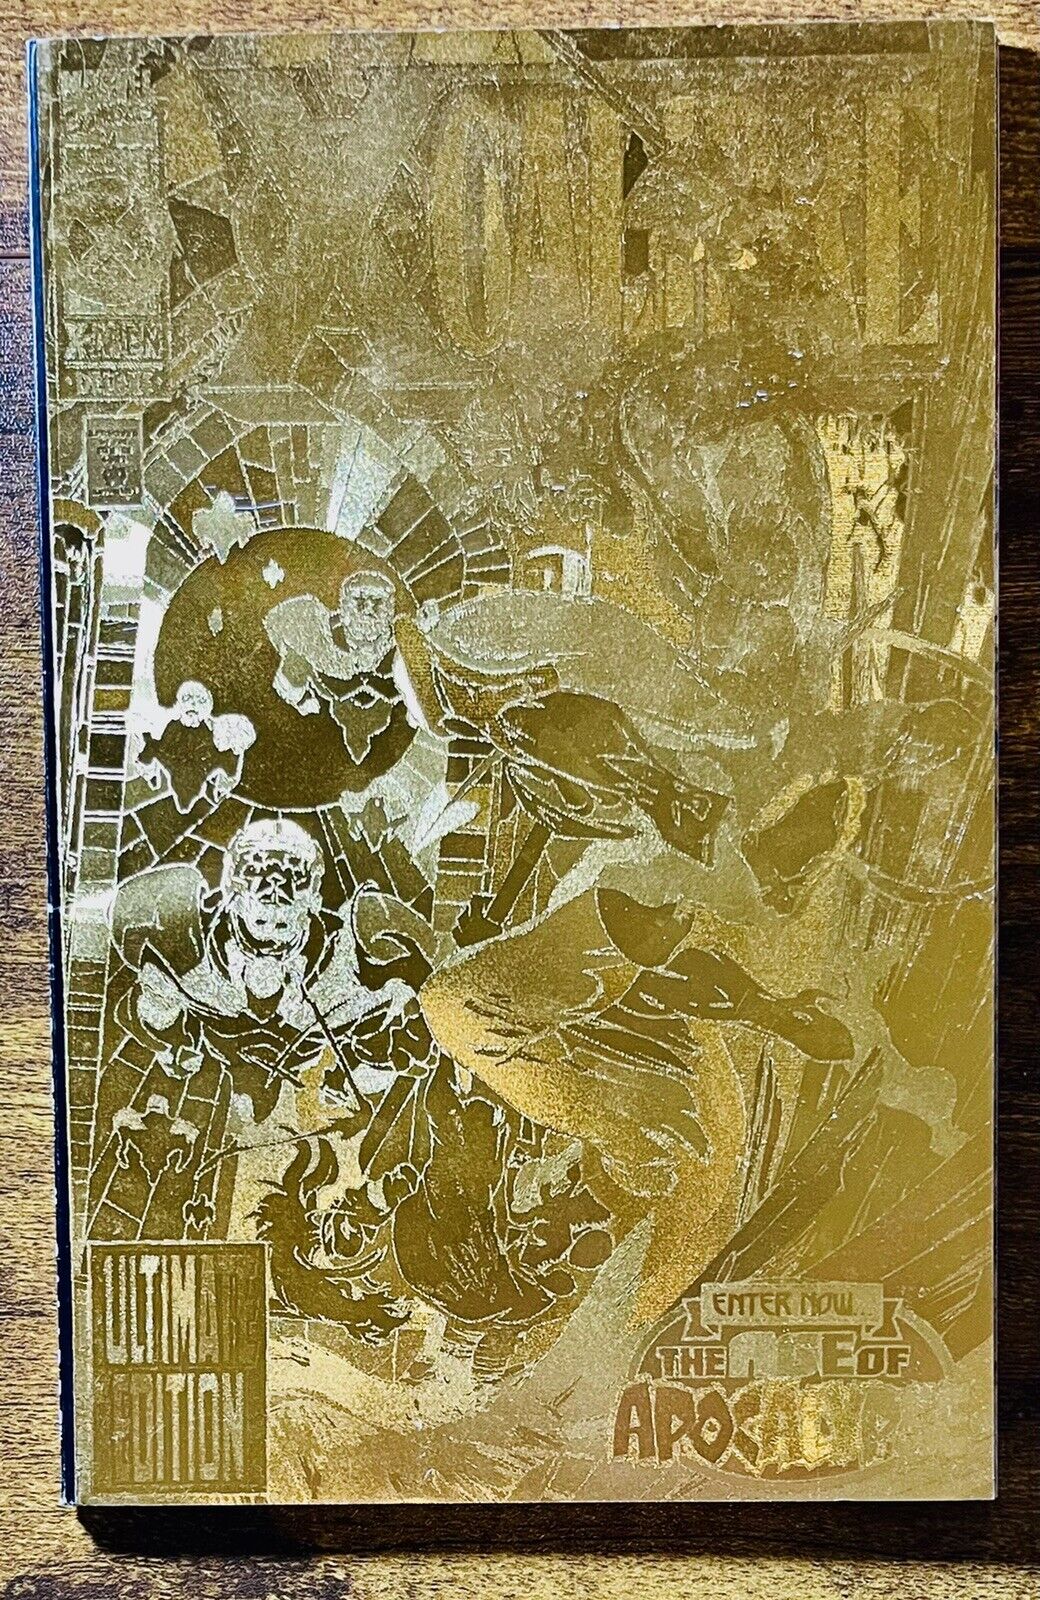 X-CALIBRE 1 TPB AGE OF APOCALYPSE GOLD FOIL ULTIMATE DELUXE EDITION MARVEL 1995